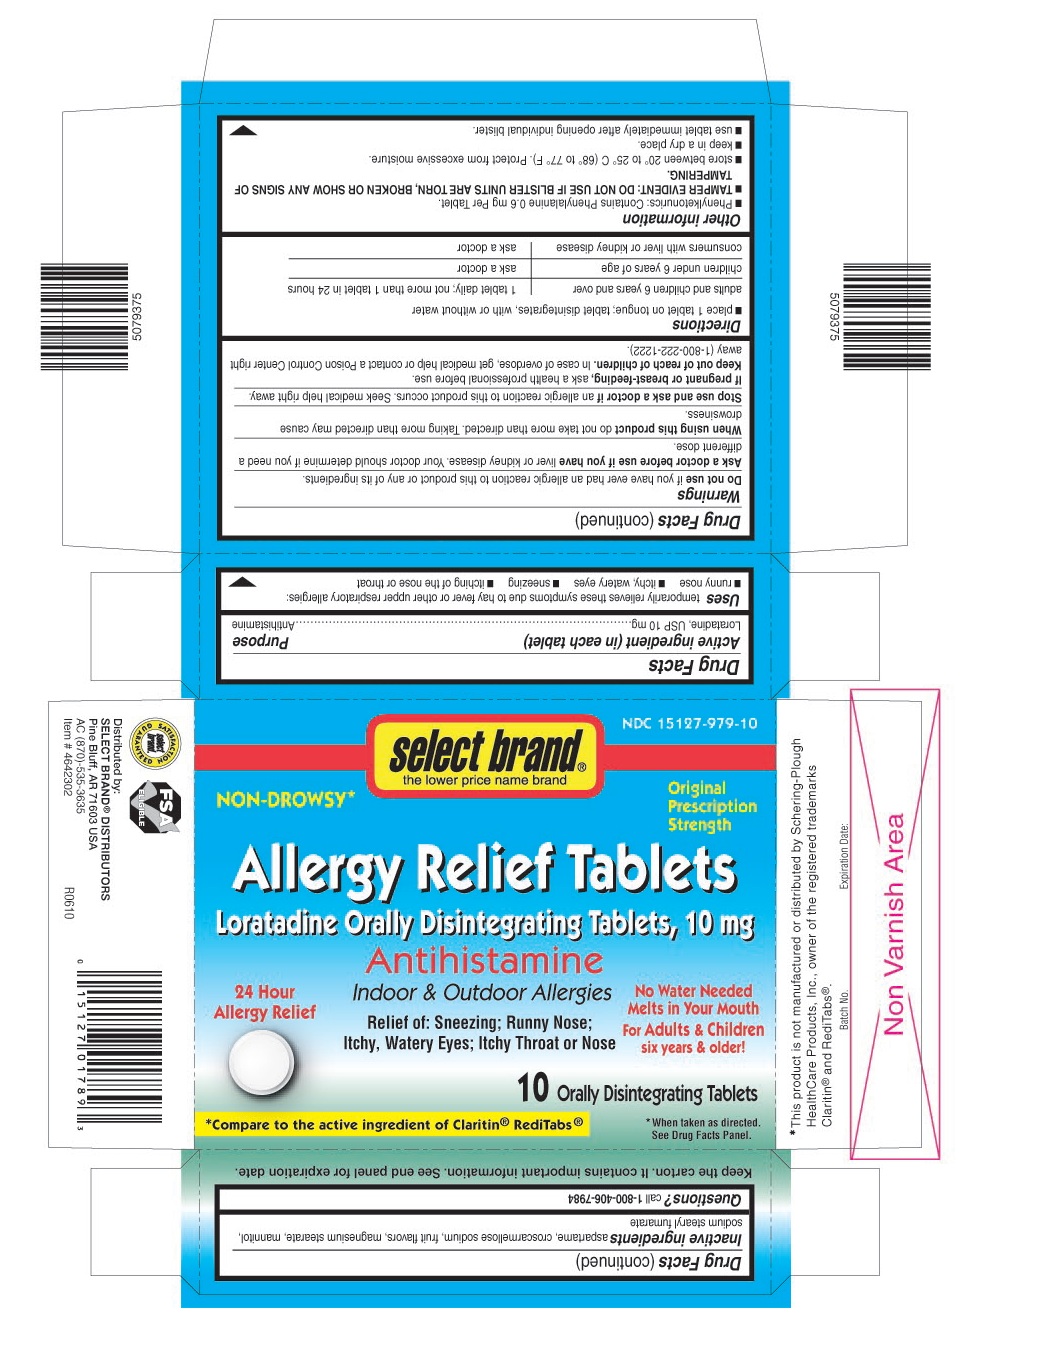 This is the 10 count blister carton label for Select Brand Loratadine ODT.